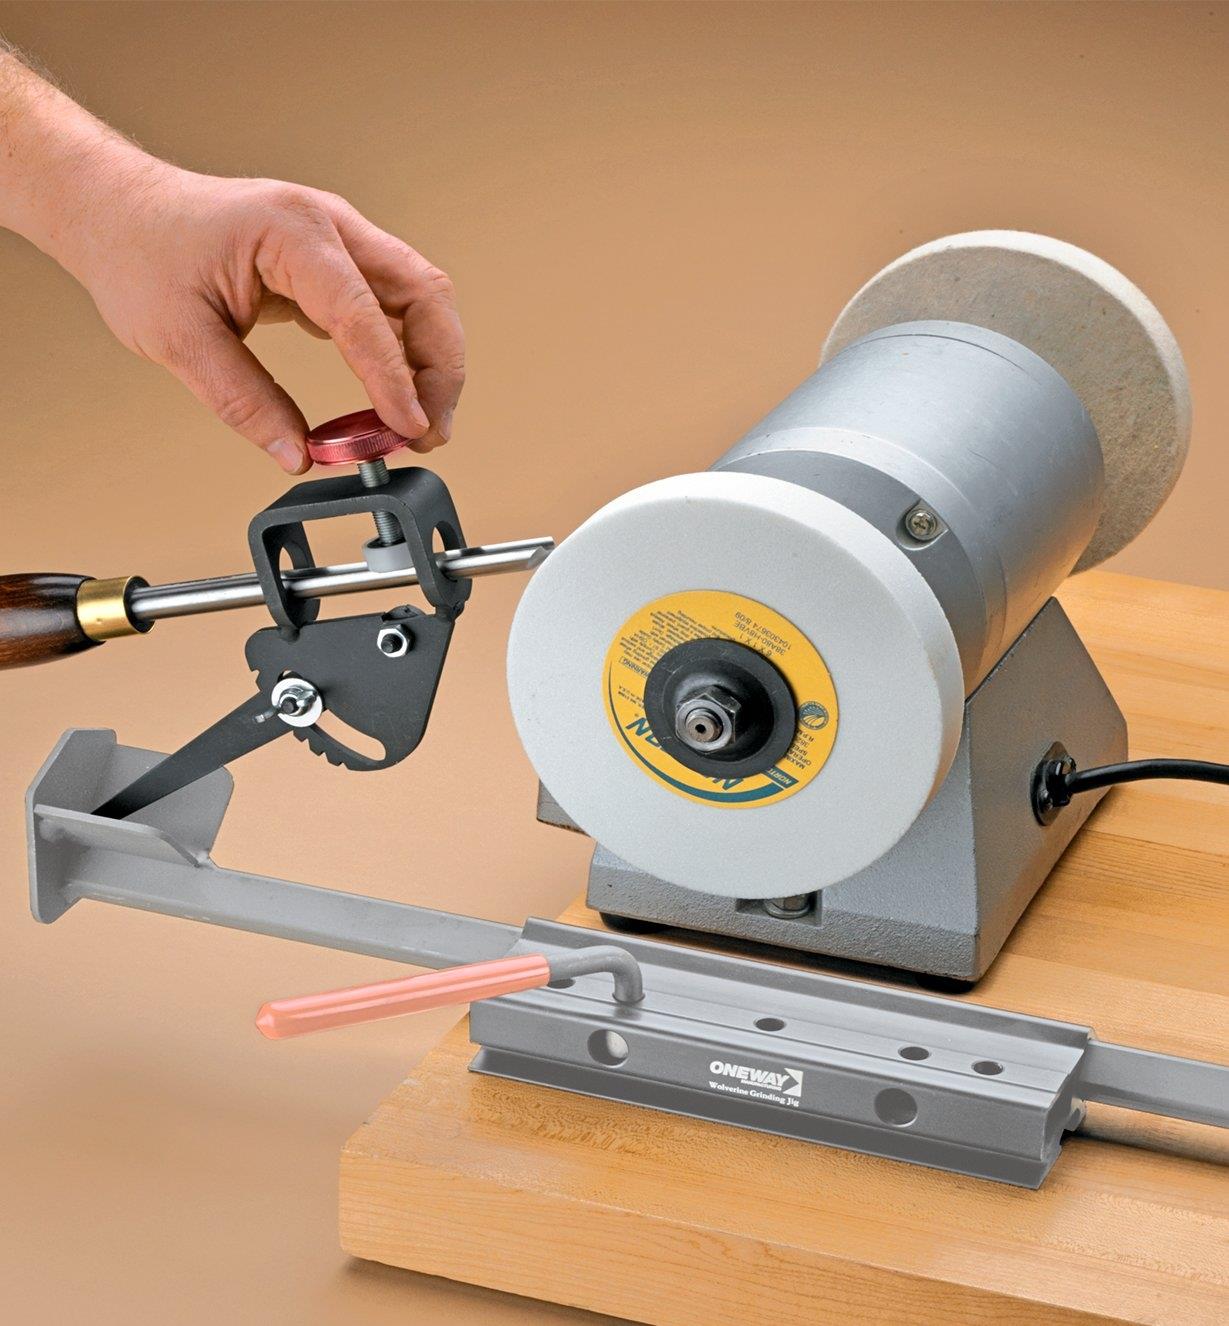 Using the Vari-Grind Accessory with the Wolverine jig to sharpen a gouge on a grinding wheel